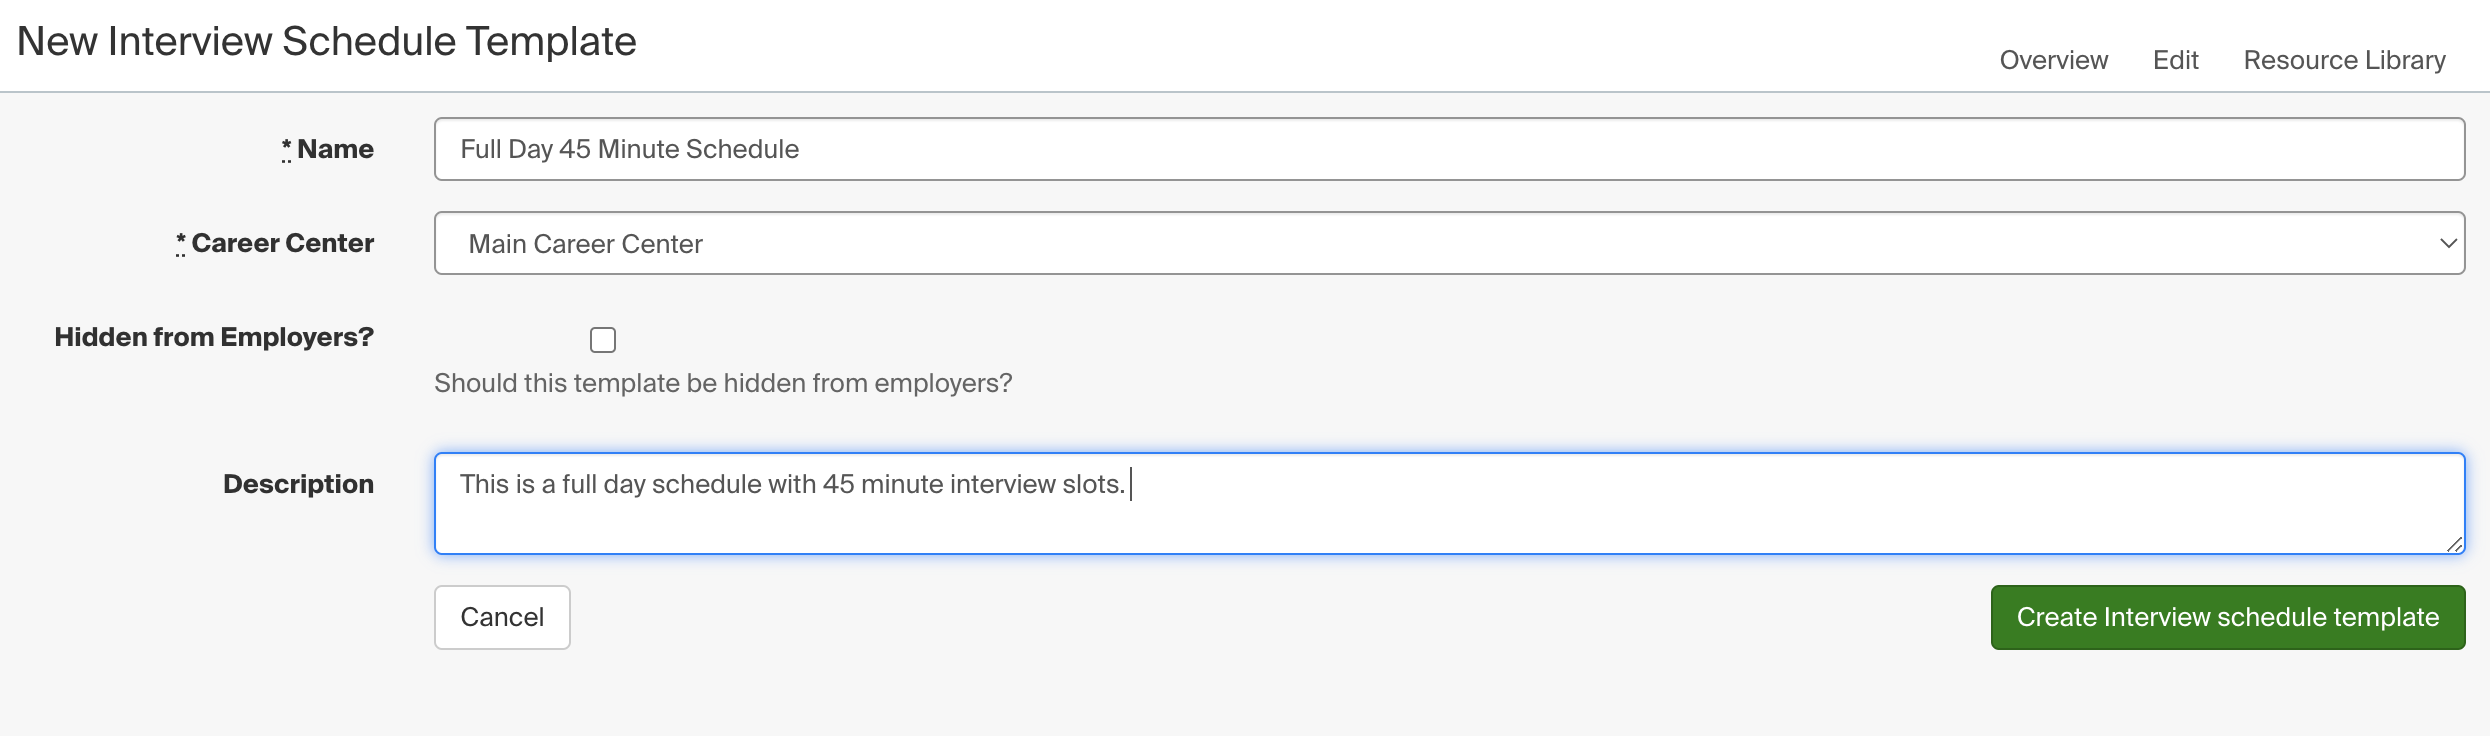 Create_Interview_Schedule_Template.png